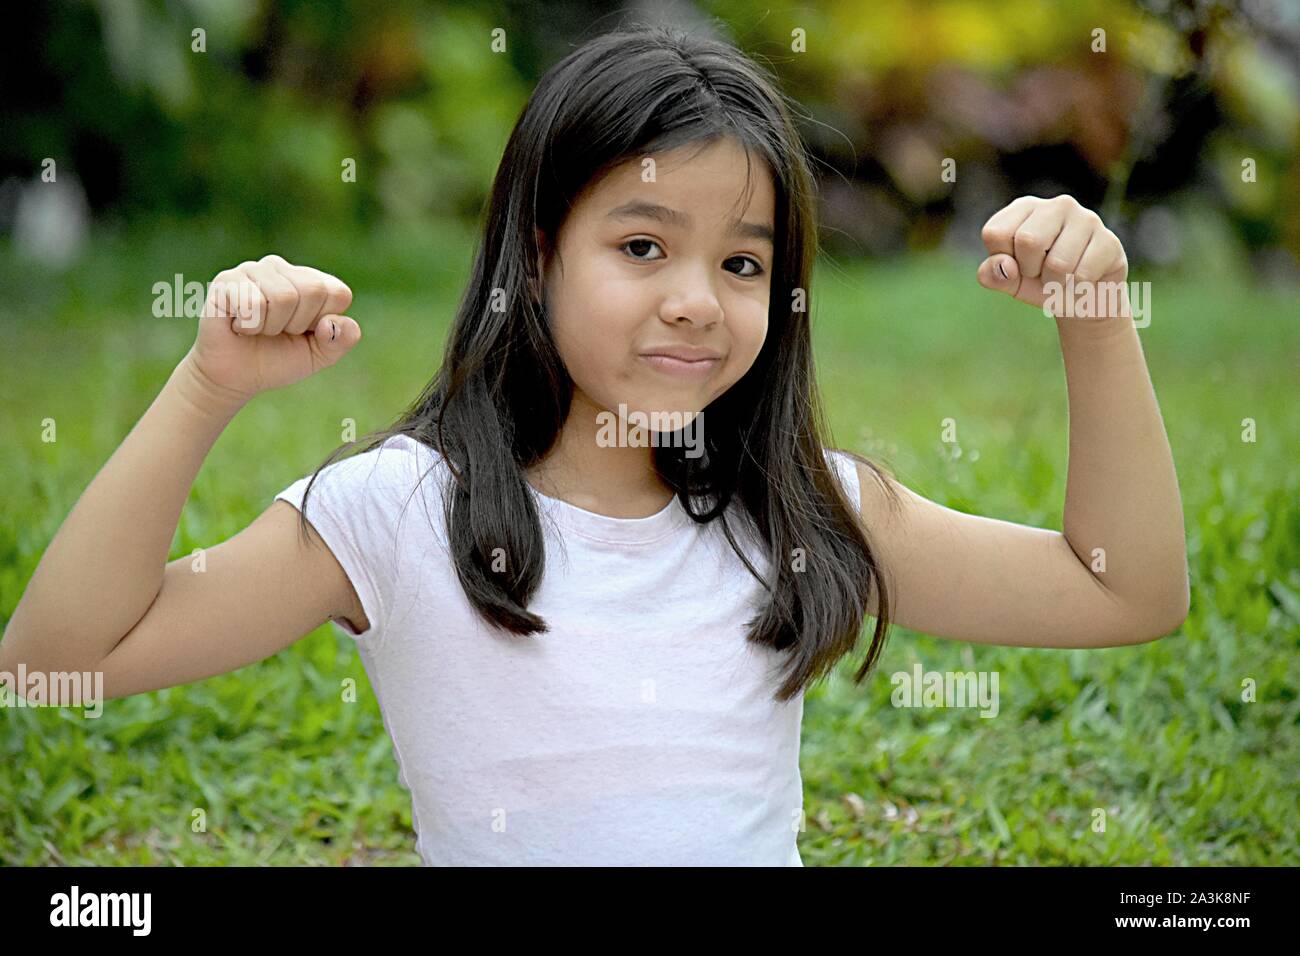 Youth And Muscles Stock Photo